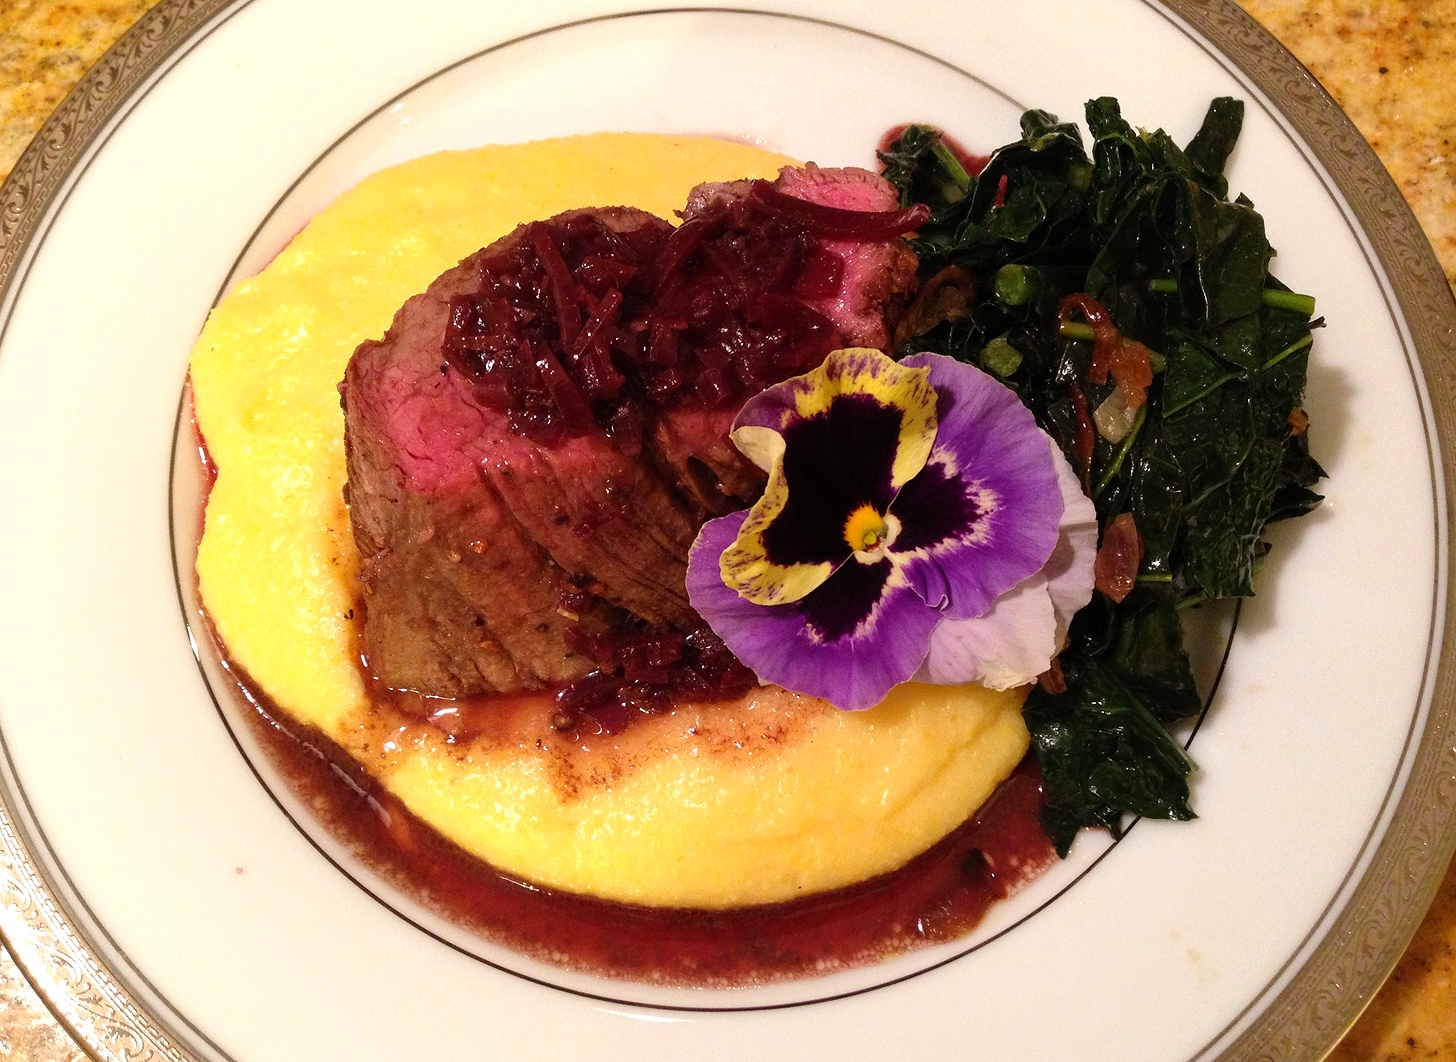 Pepper-crusted beef tenderloin on soft polenta, Tuscan kale with garlic and peperoncino, and a barolo sauce